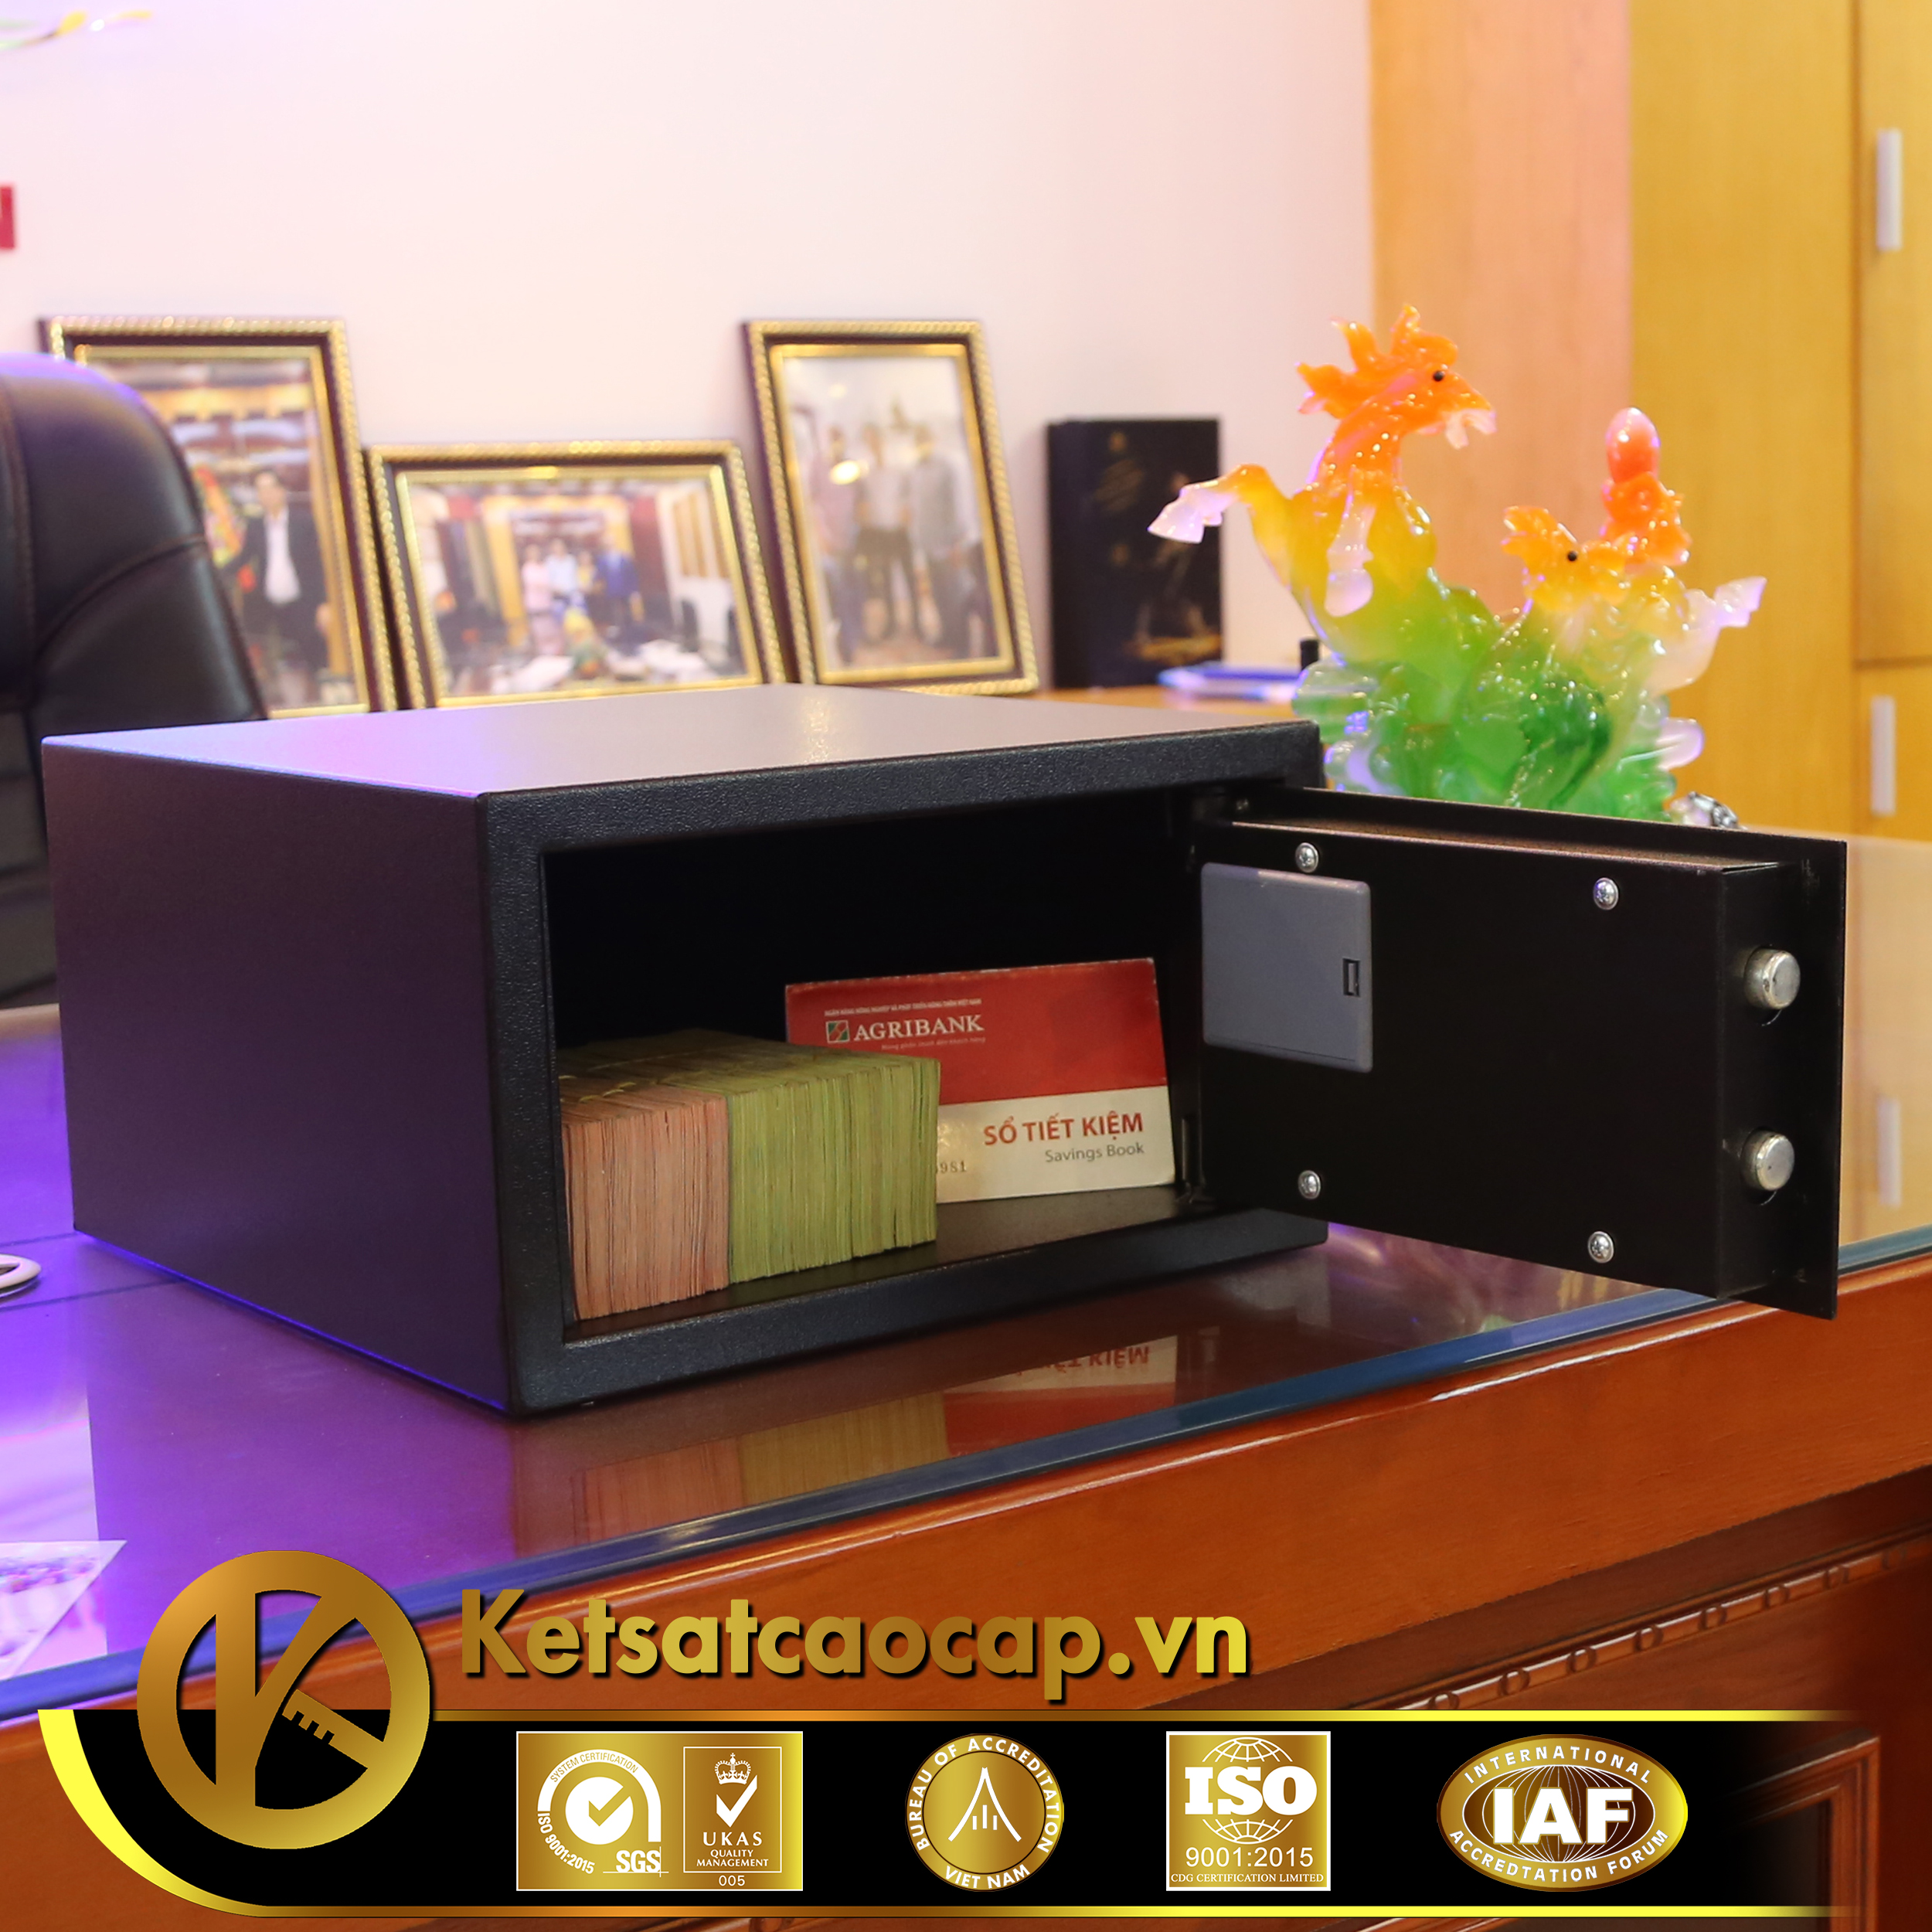 Hotel Room Security Suppliers and Exporters‎